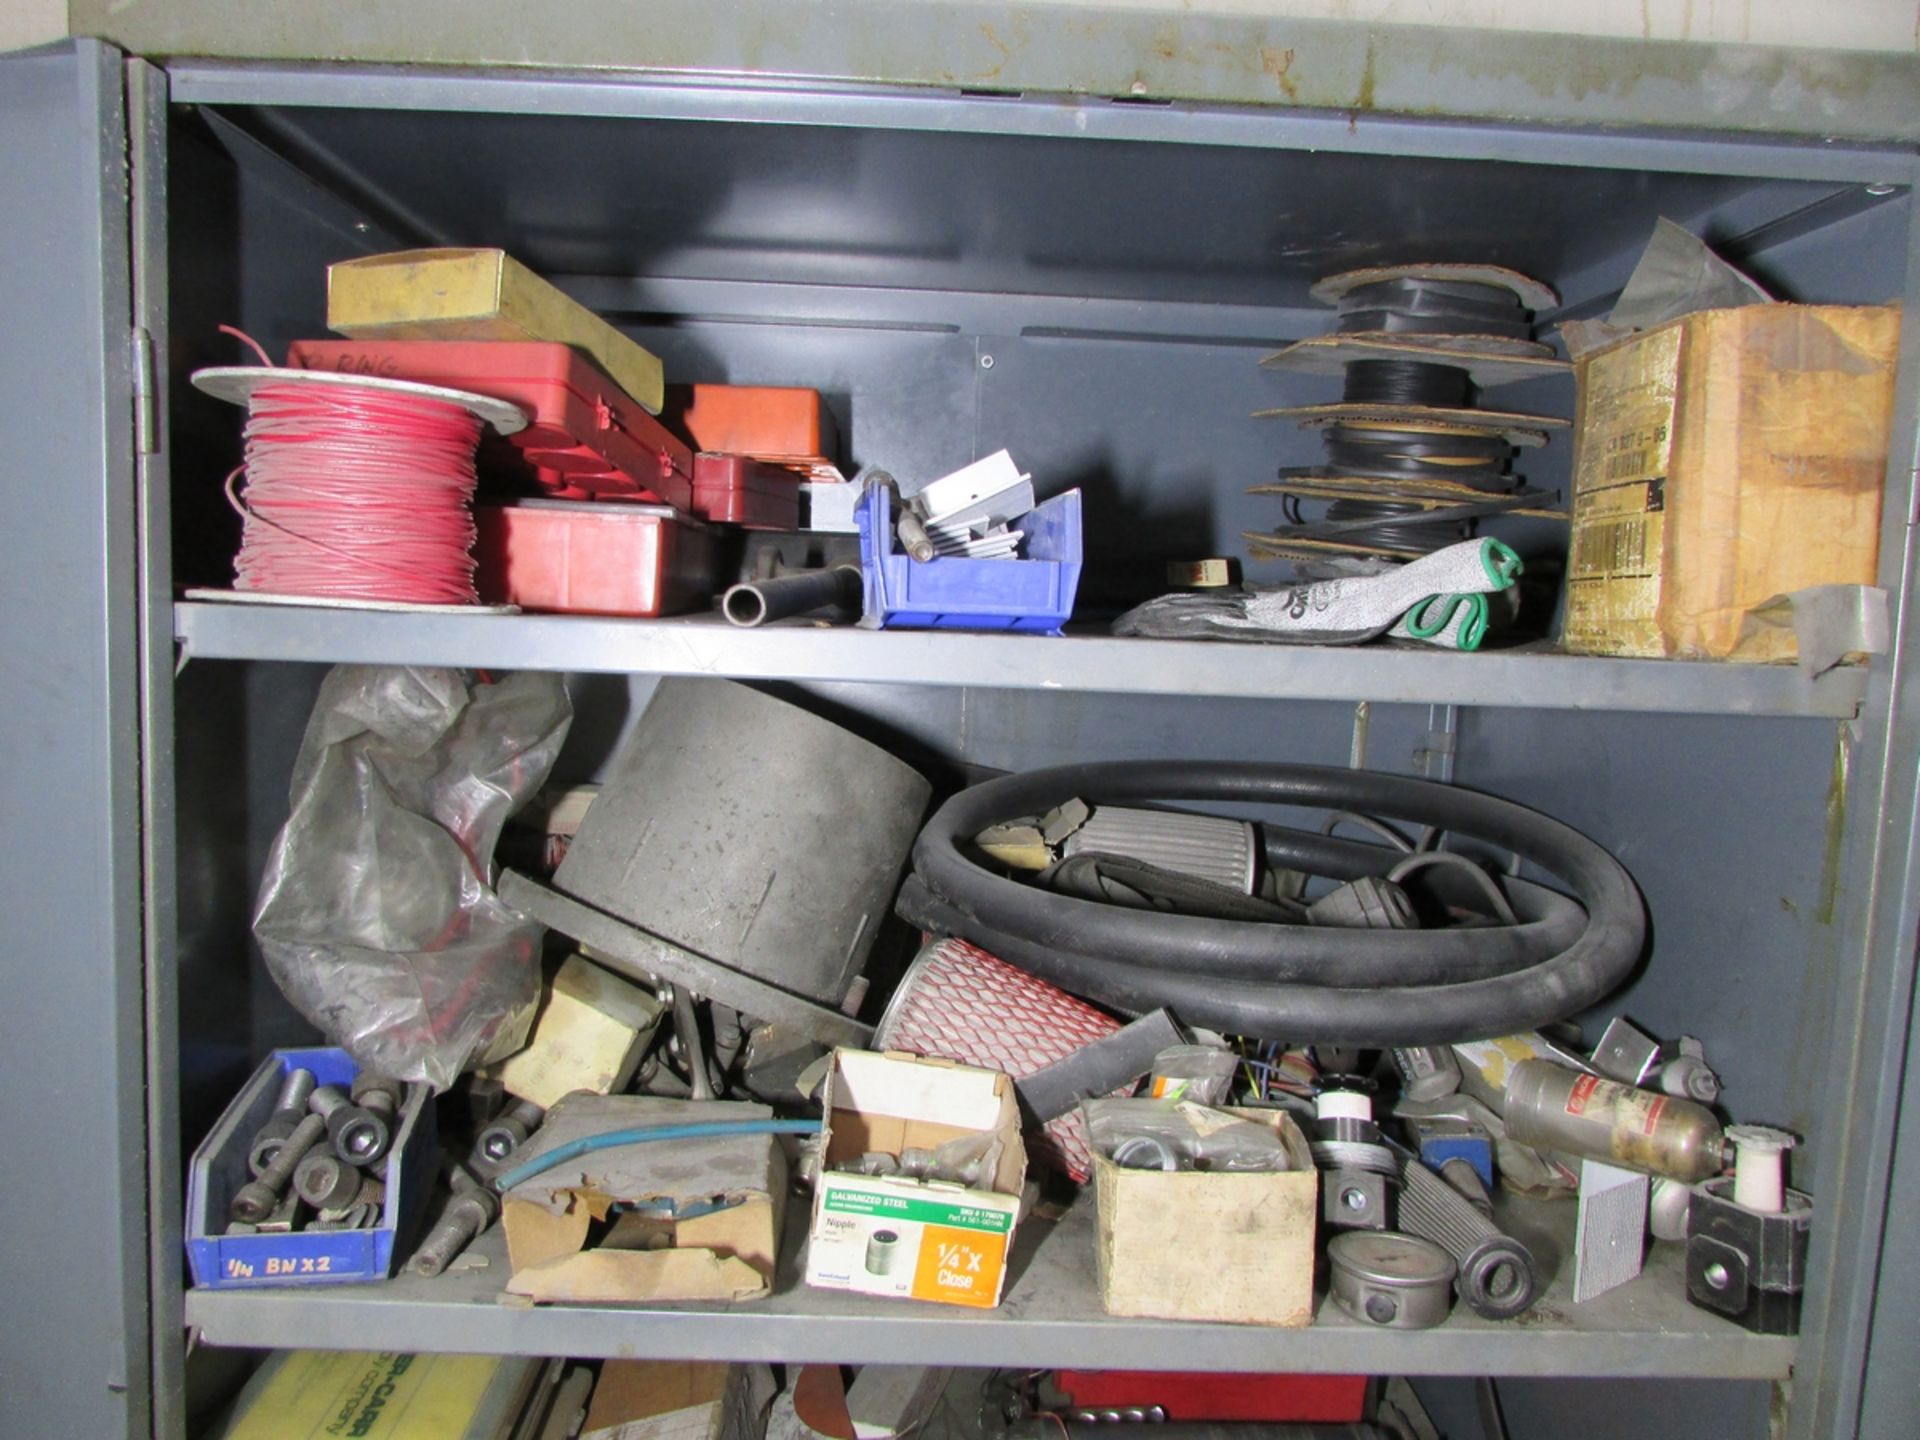 LOT - (3) 2-DOOR CABINETS, W/ CONTENTS: ASSORTED PARTS, FUSES, HARDWARE, ETC. - Image 6 of 10